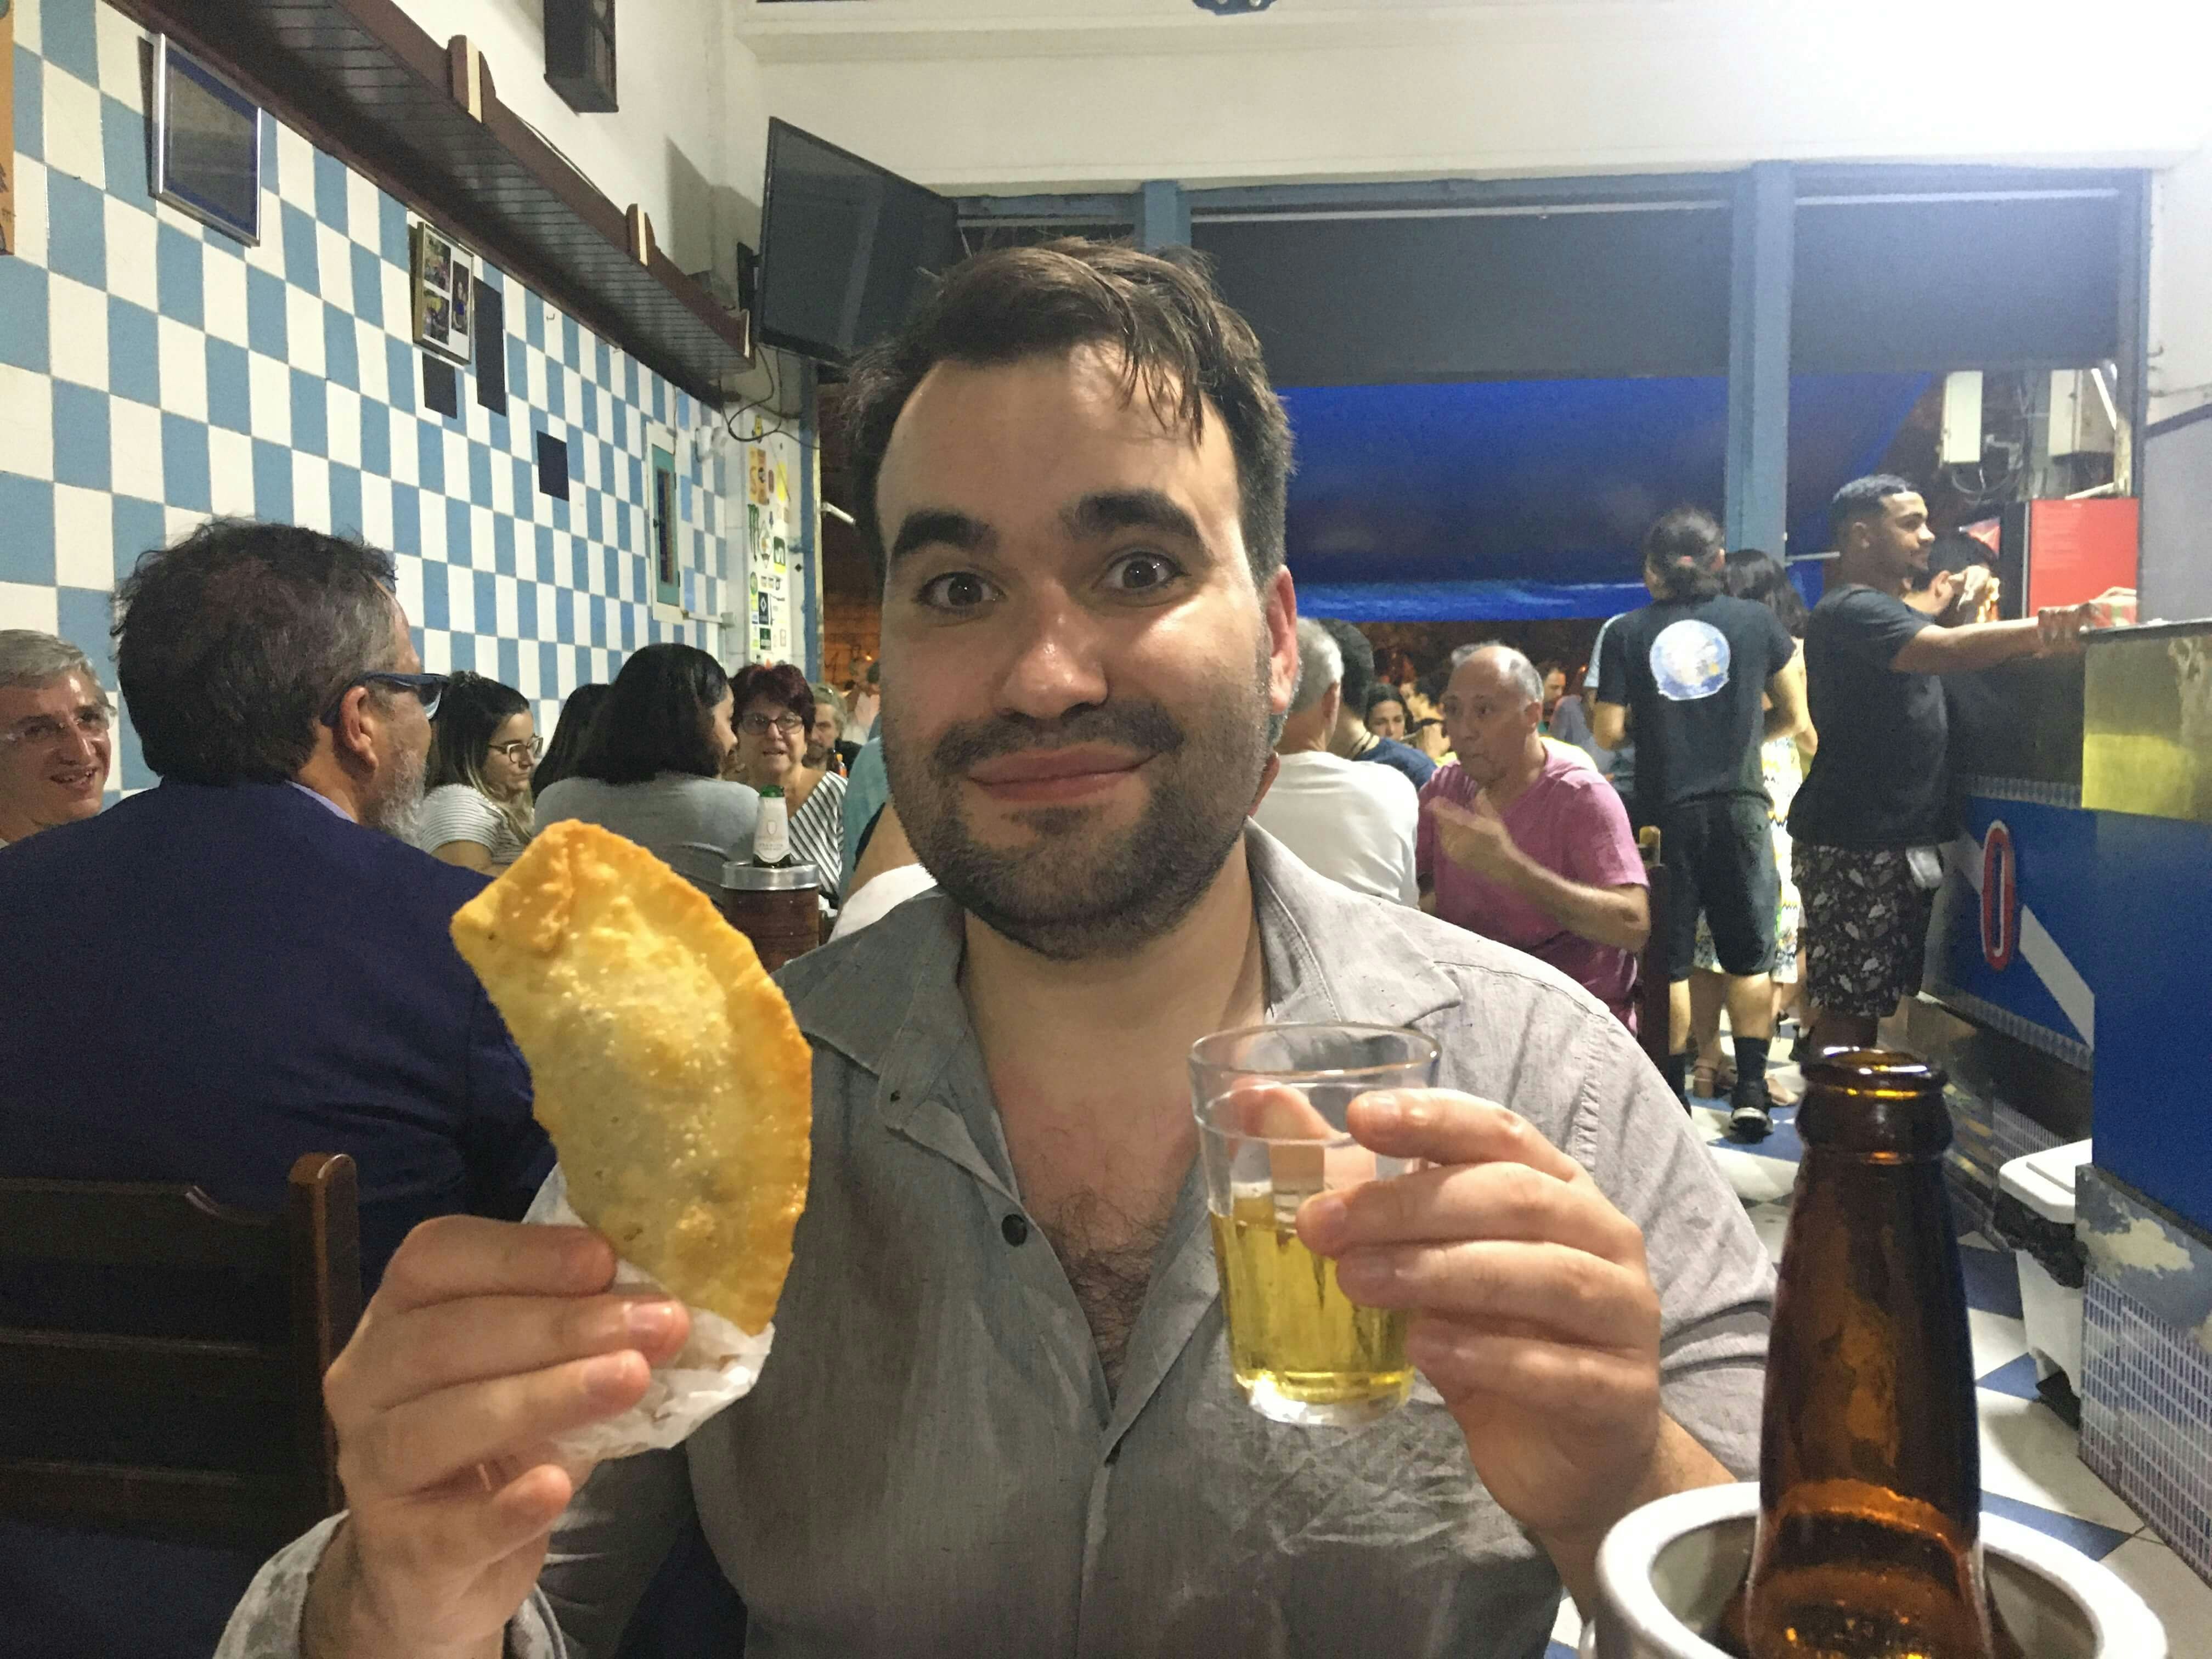 The author holds a glass of beer and a fried stuff pie. A busy restaurant is behind him